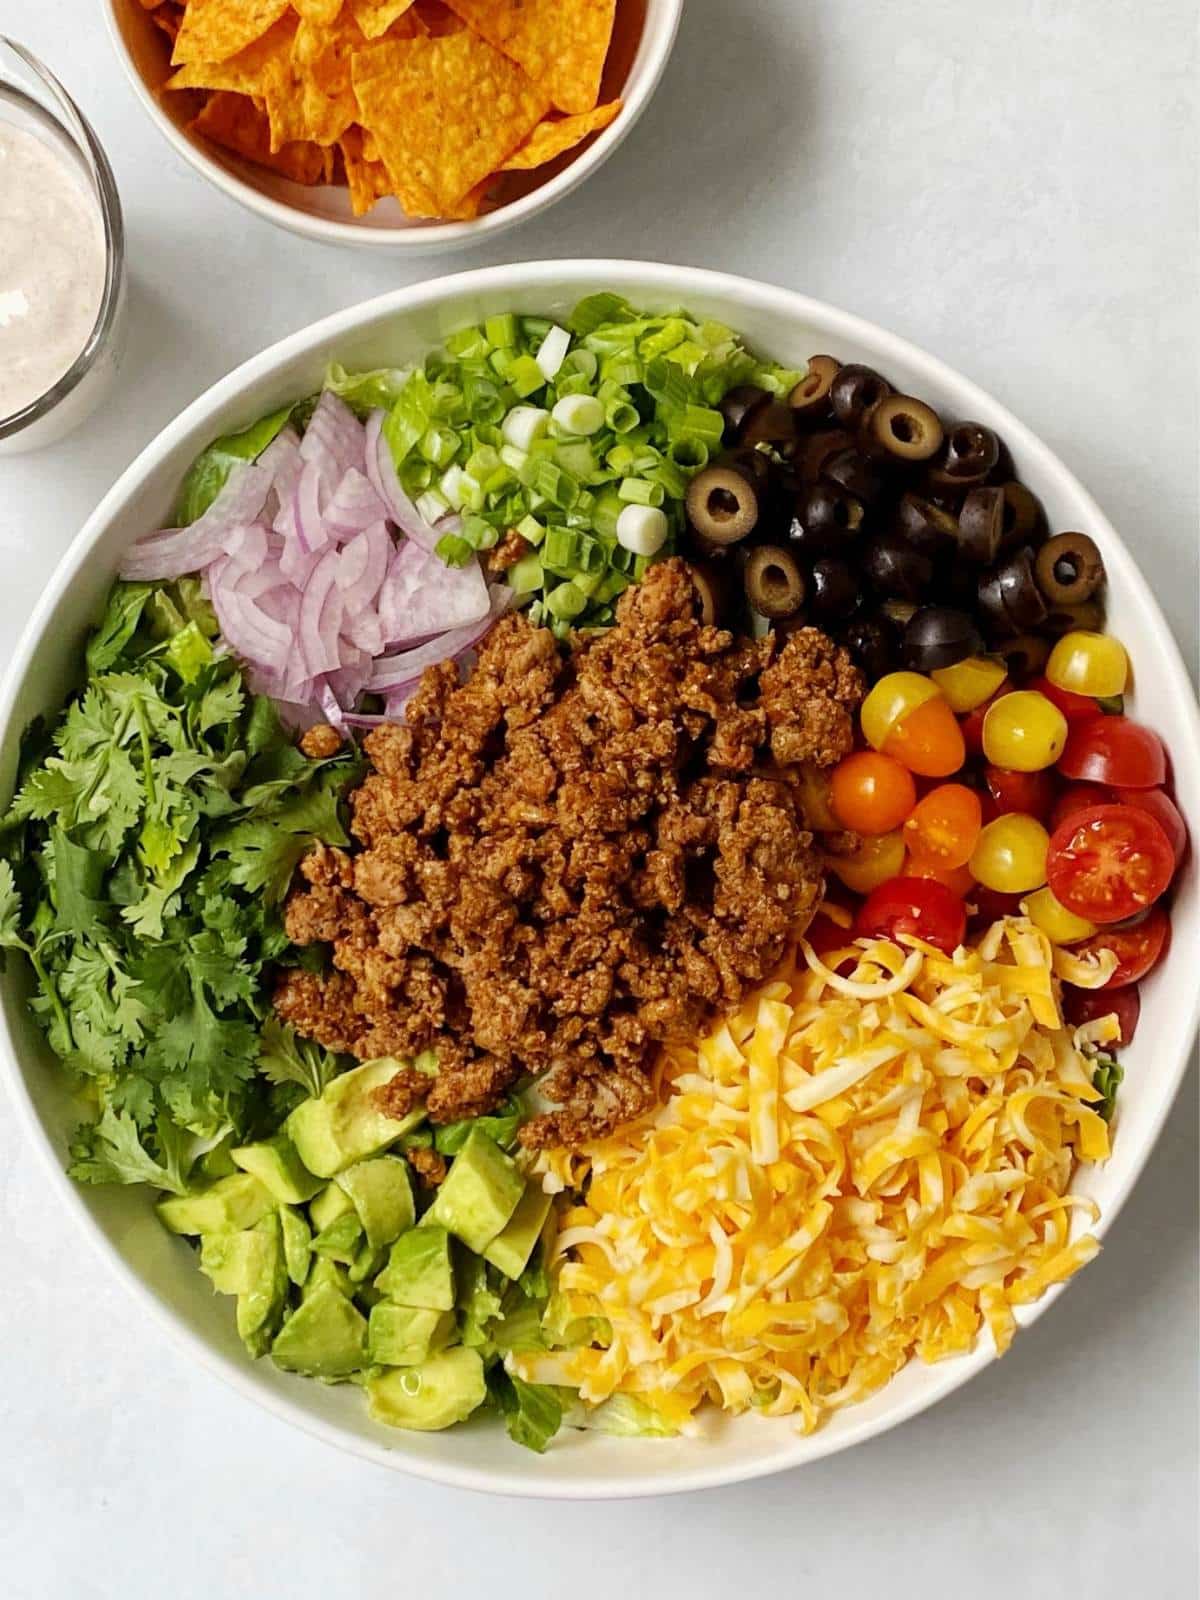 Serving bowl filled with lettuce and topped with the other ingredients in groupings.